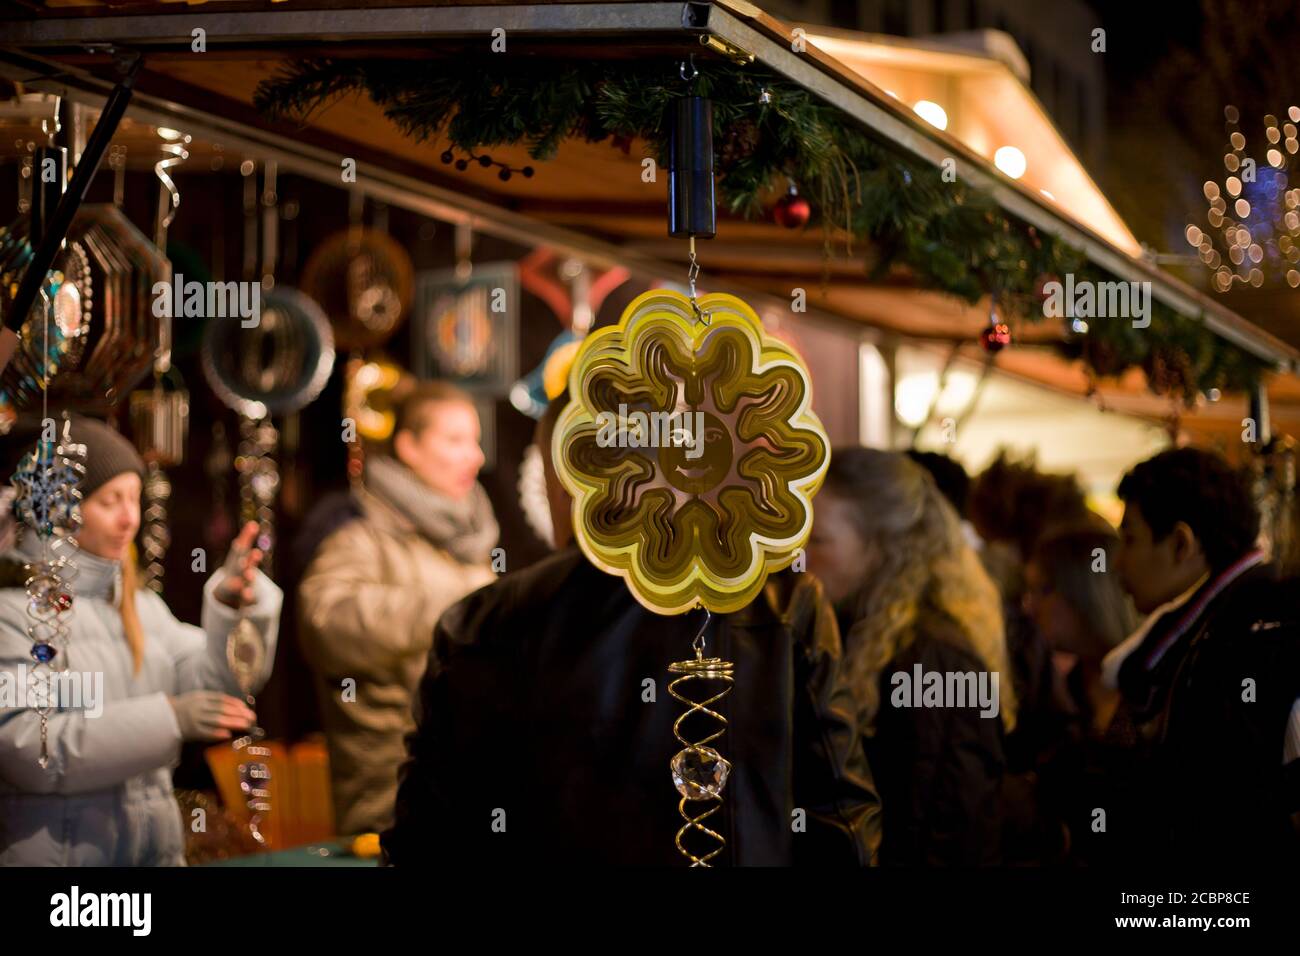 Hanging ornaments at a Christmas market stall, people busy behind, sun, wind spinner, wind chime,decorations for patios, street photography, authentic Stock Photo